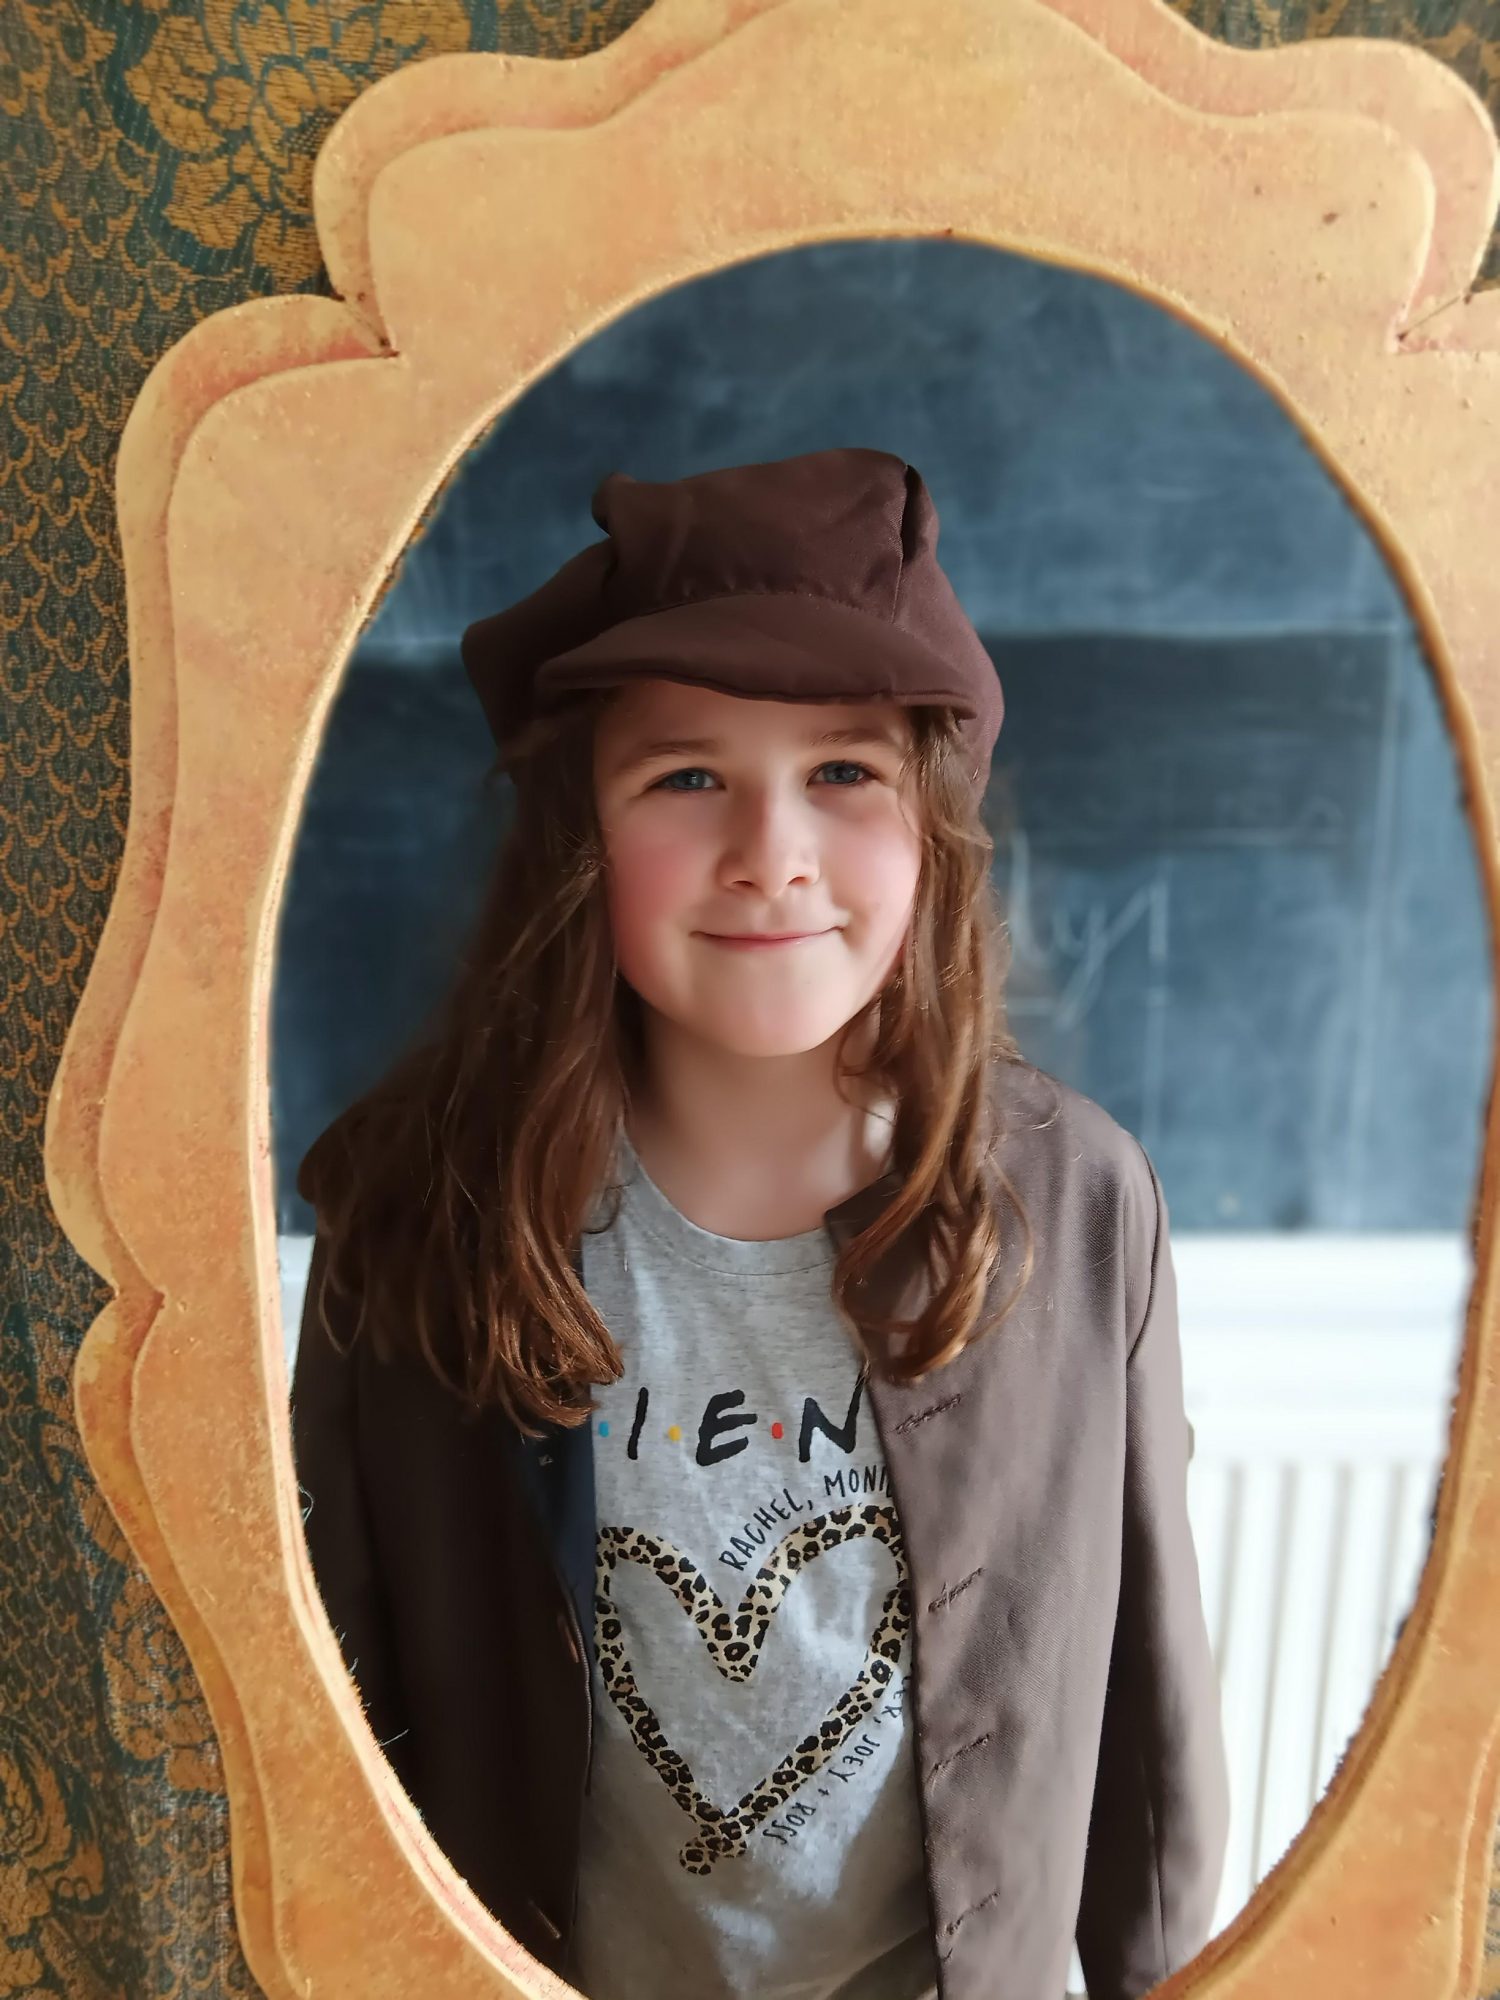 Victorian child dress up costumer for May half term